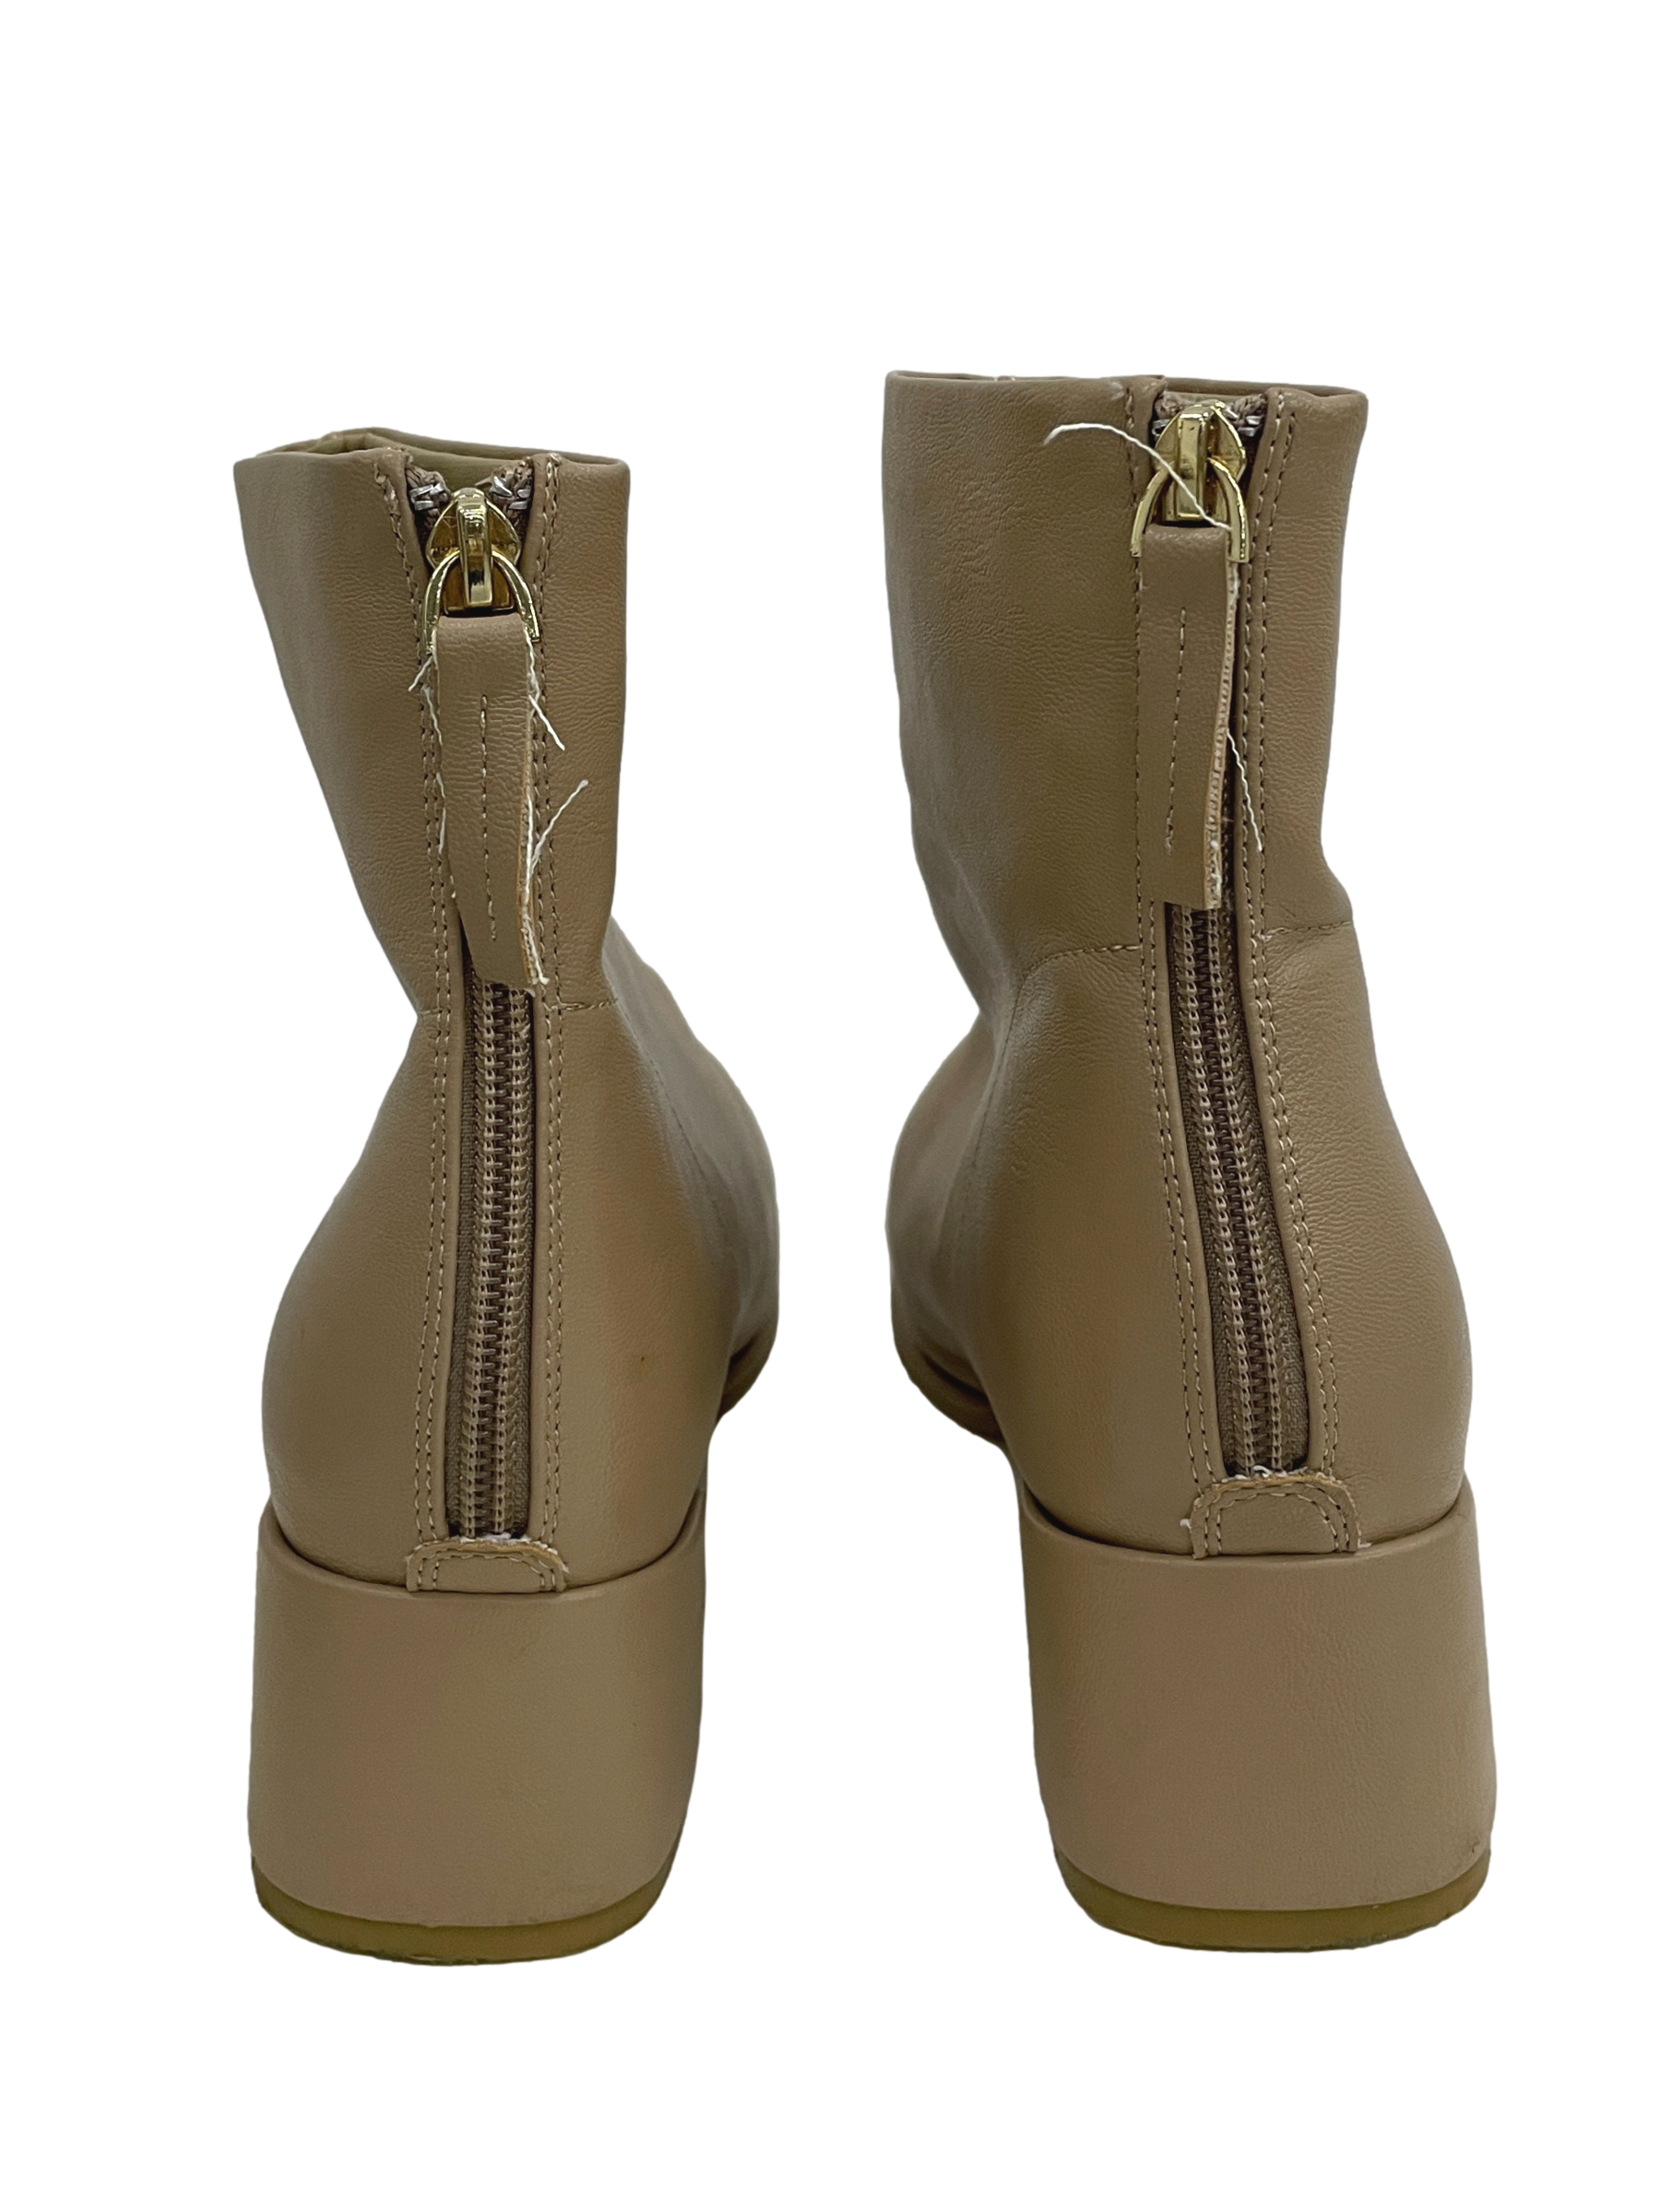 Sepia Brown Heeled Chelsea Boots